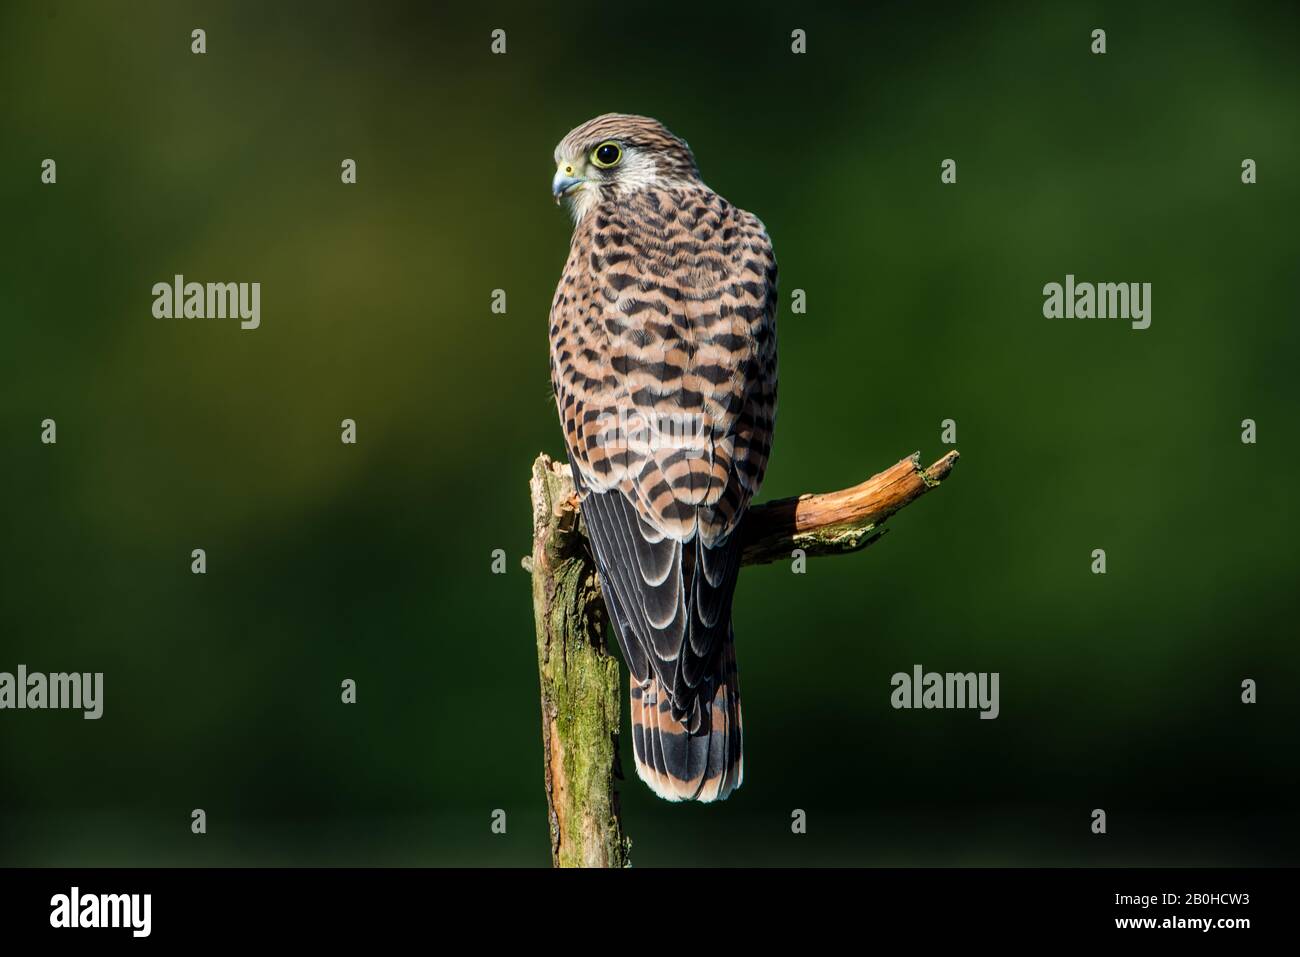 The hunting position for the young kestrel (Falco tinnunculus) with a nice green defocused background Stock Photo